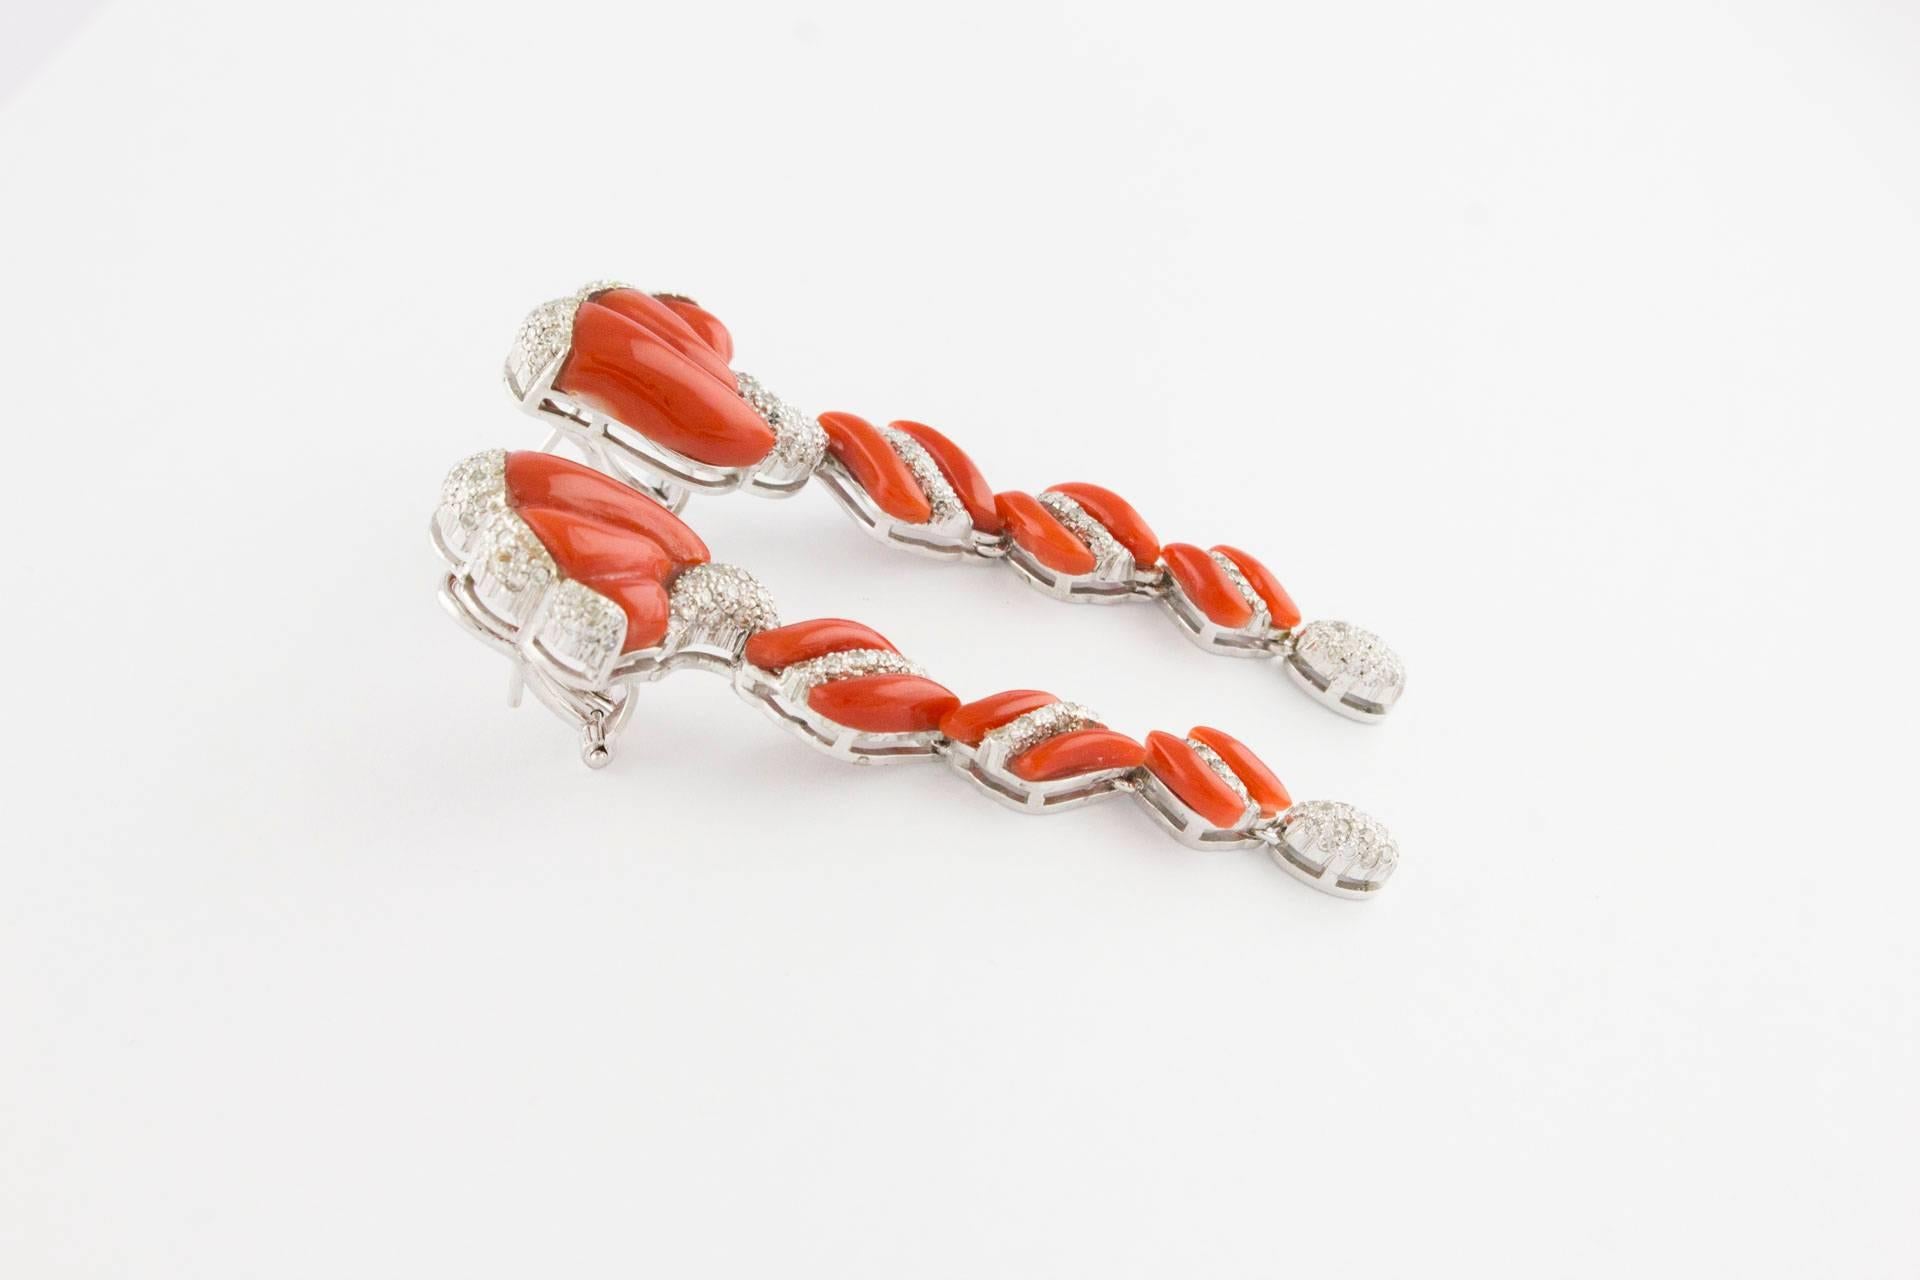 Dangle Earrings in 14kt White Gold with Diamonds and Coral
Diamonds ct 1.91
Coral Weight gr 3.35
Total Weight gr 18
R.f. couh

For any inquiries,please contact the seller through the message center.